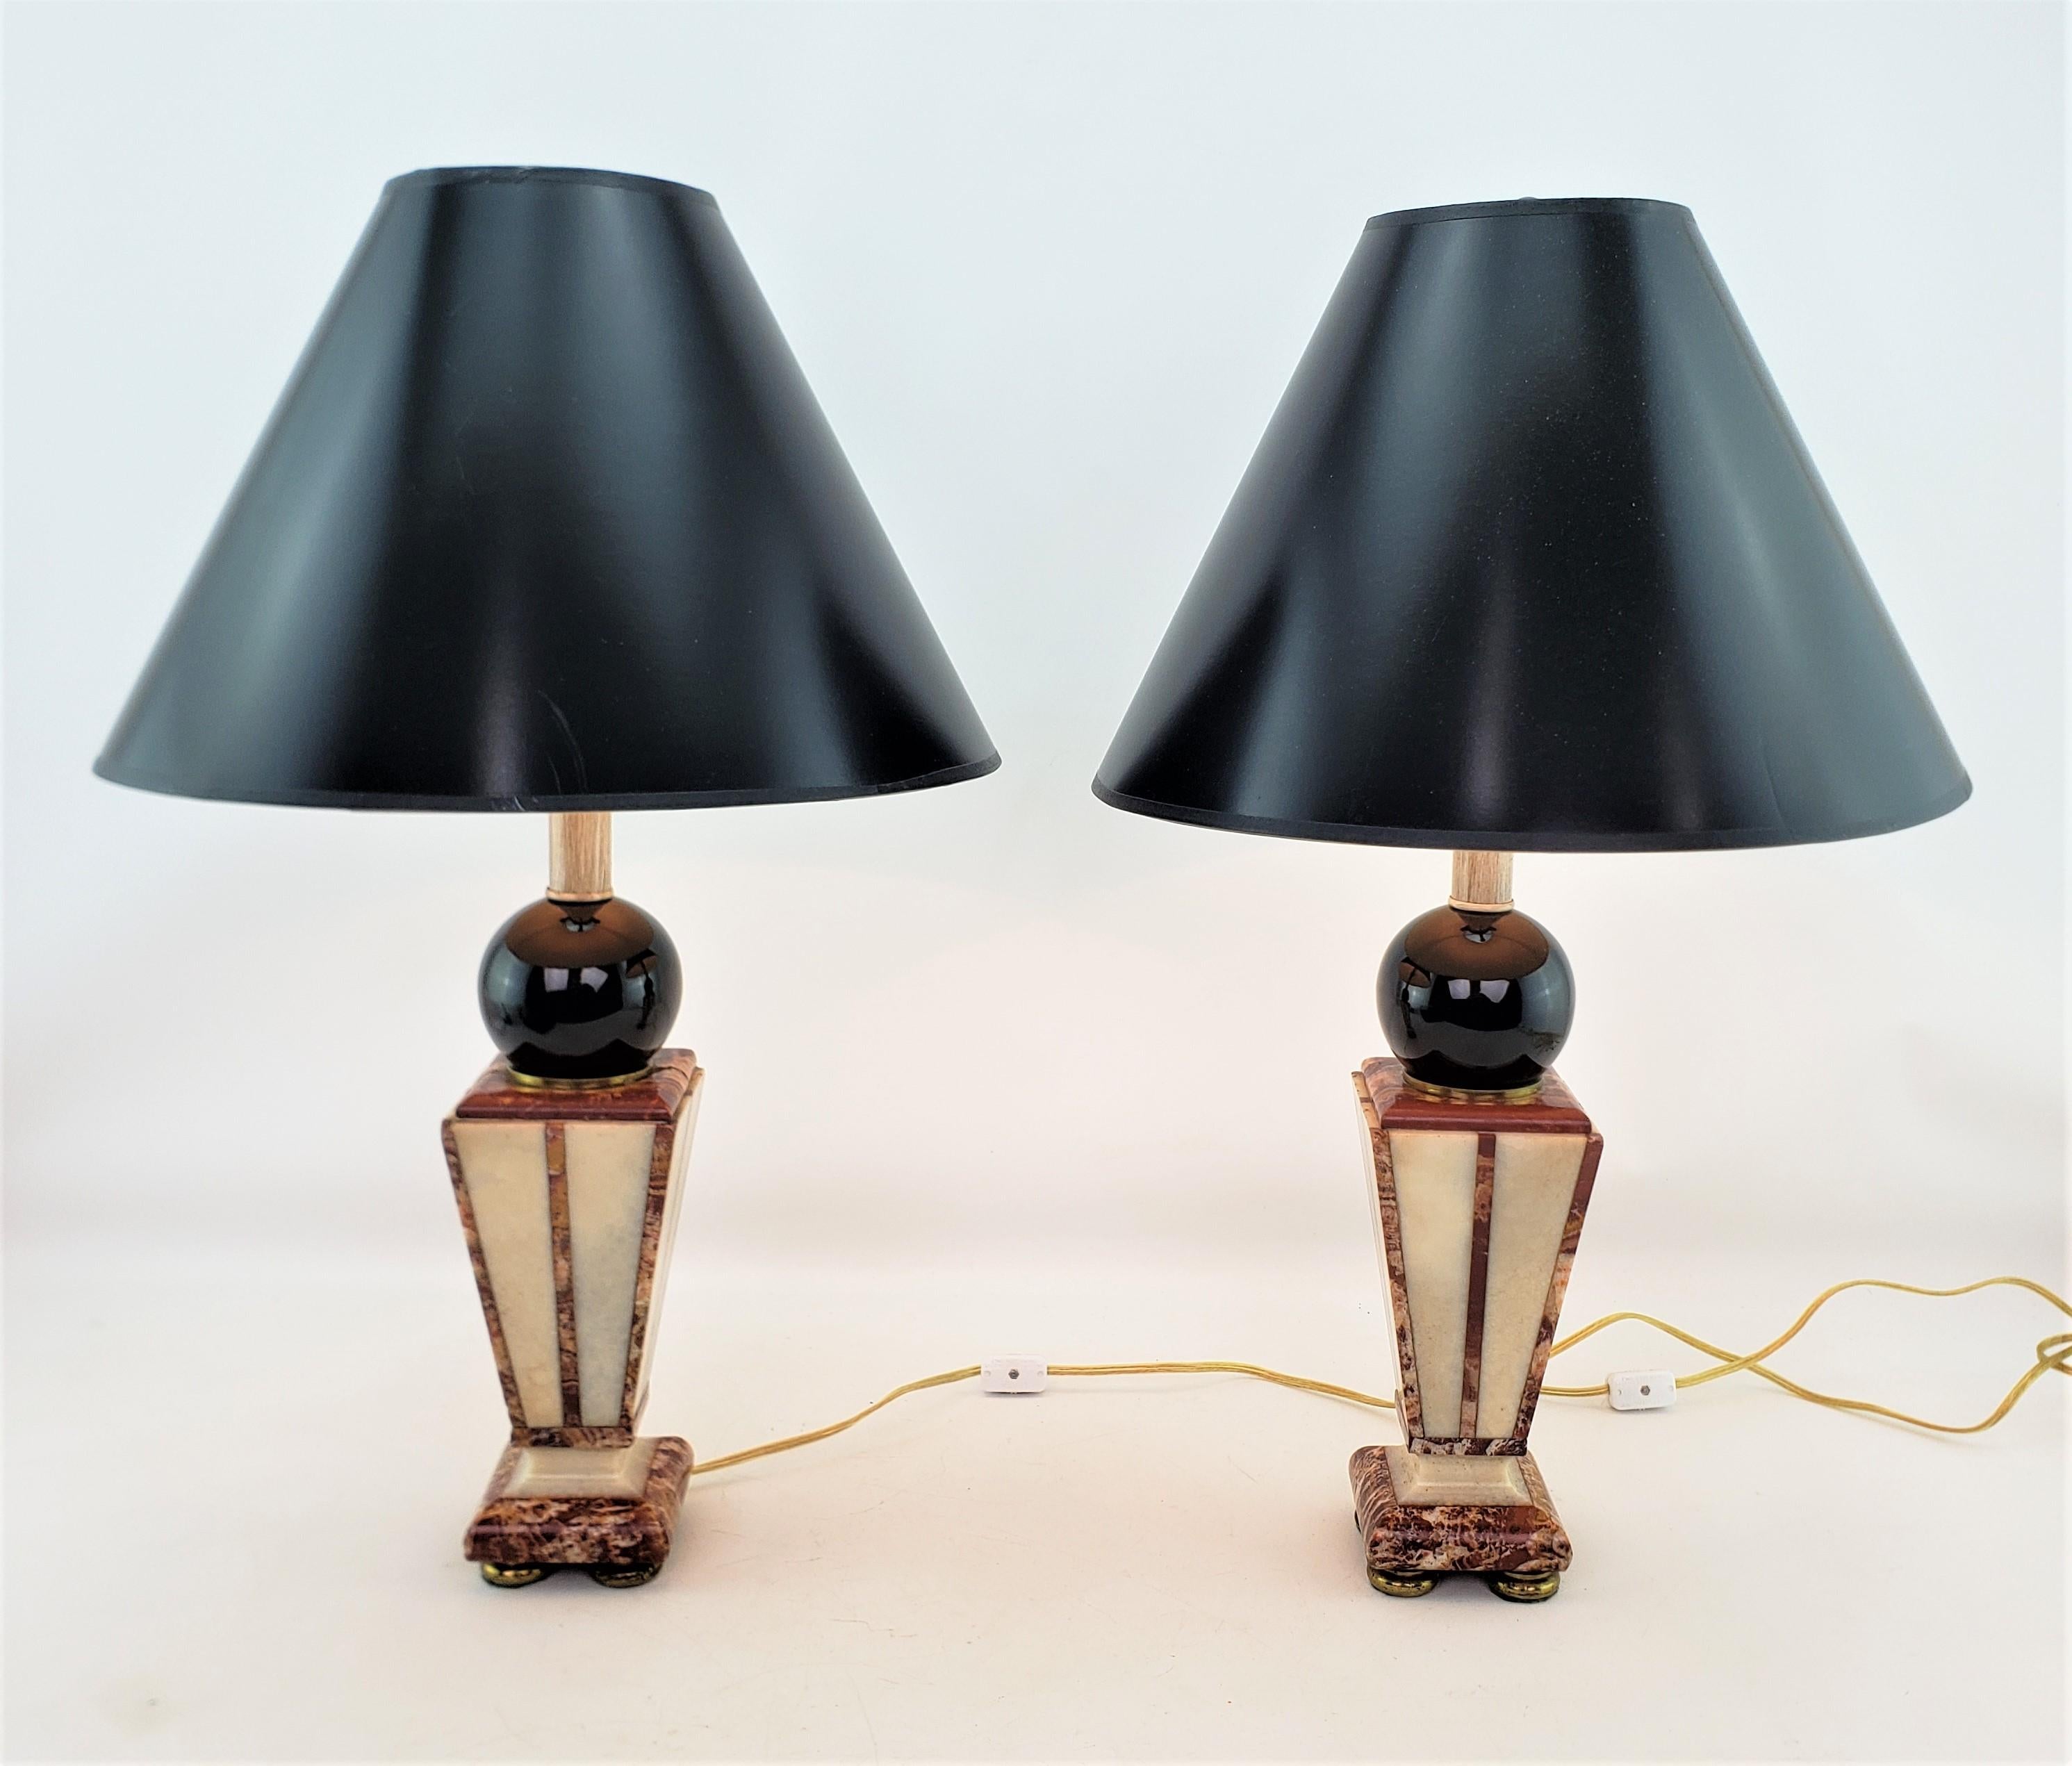 This pair of converted antique table lamps are unsigned, but presumed to have originated from Italy and date to approximately 1920 and done in the period Art Deco style. The lamp bases, which were once garnitures, are done in two tones of cut and